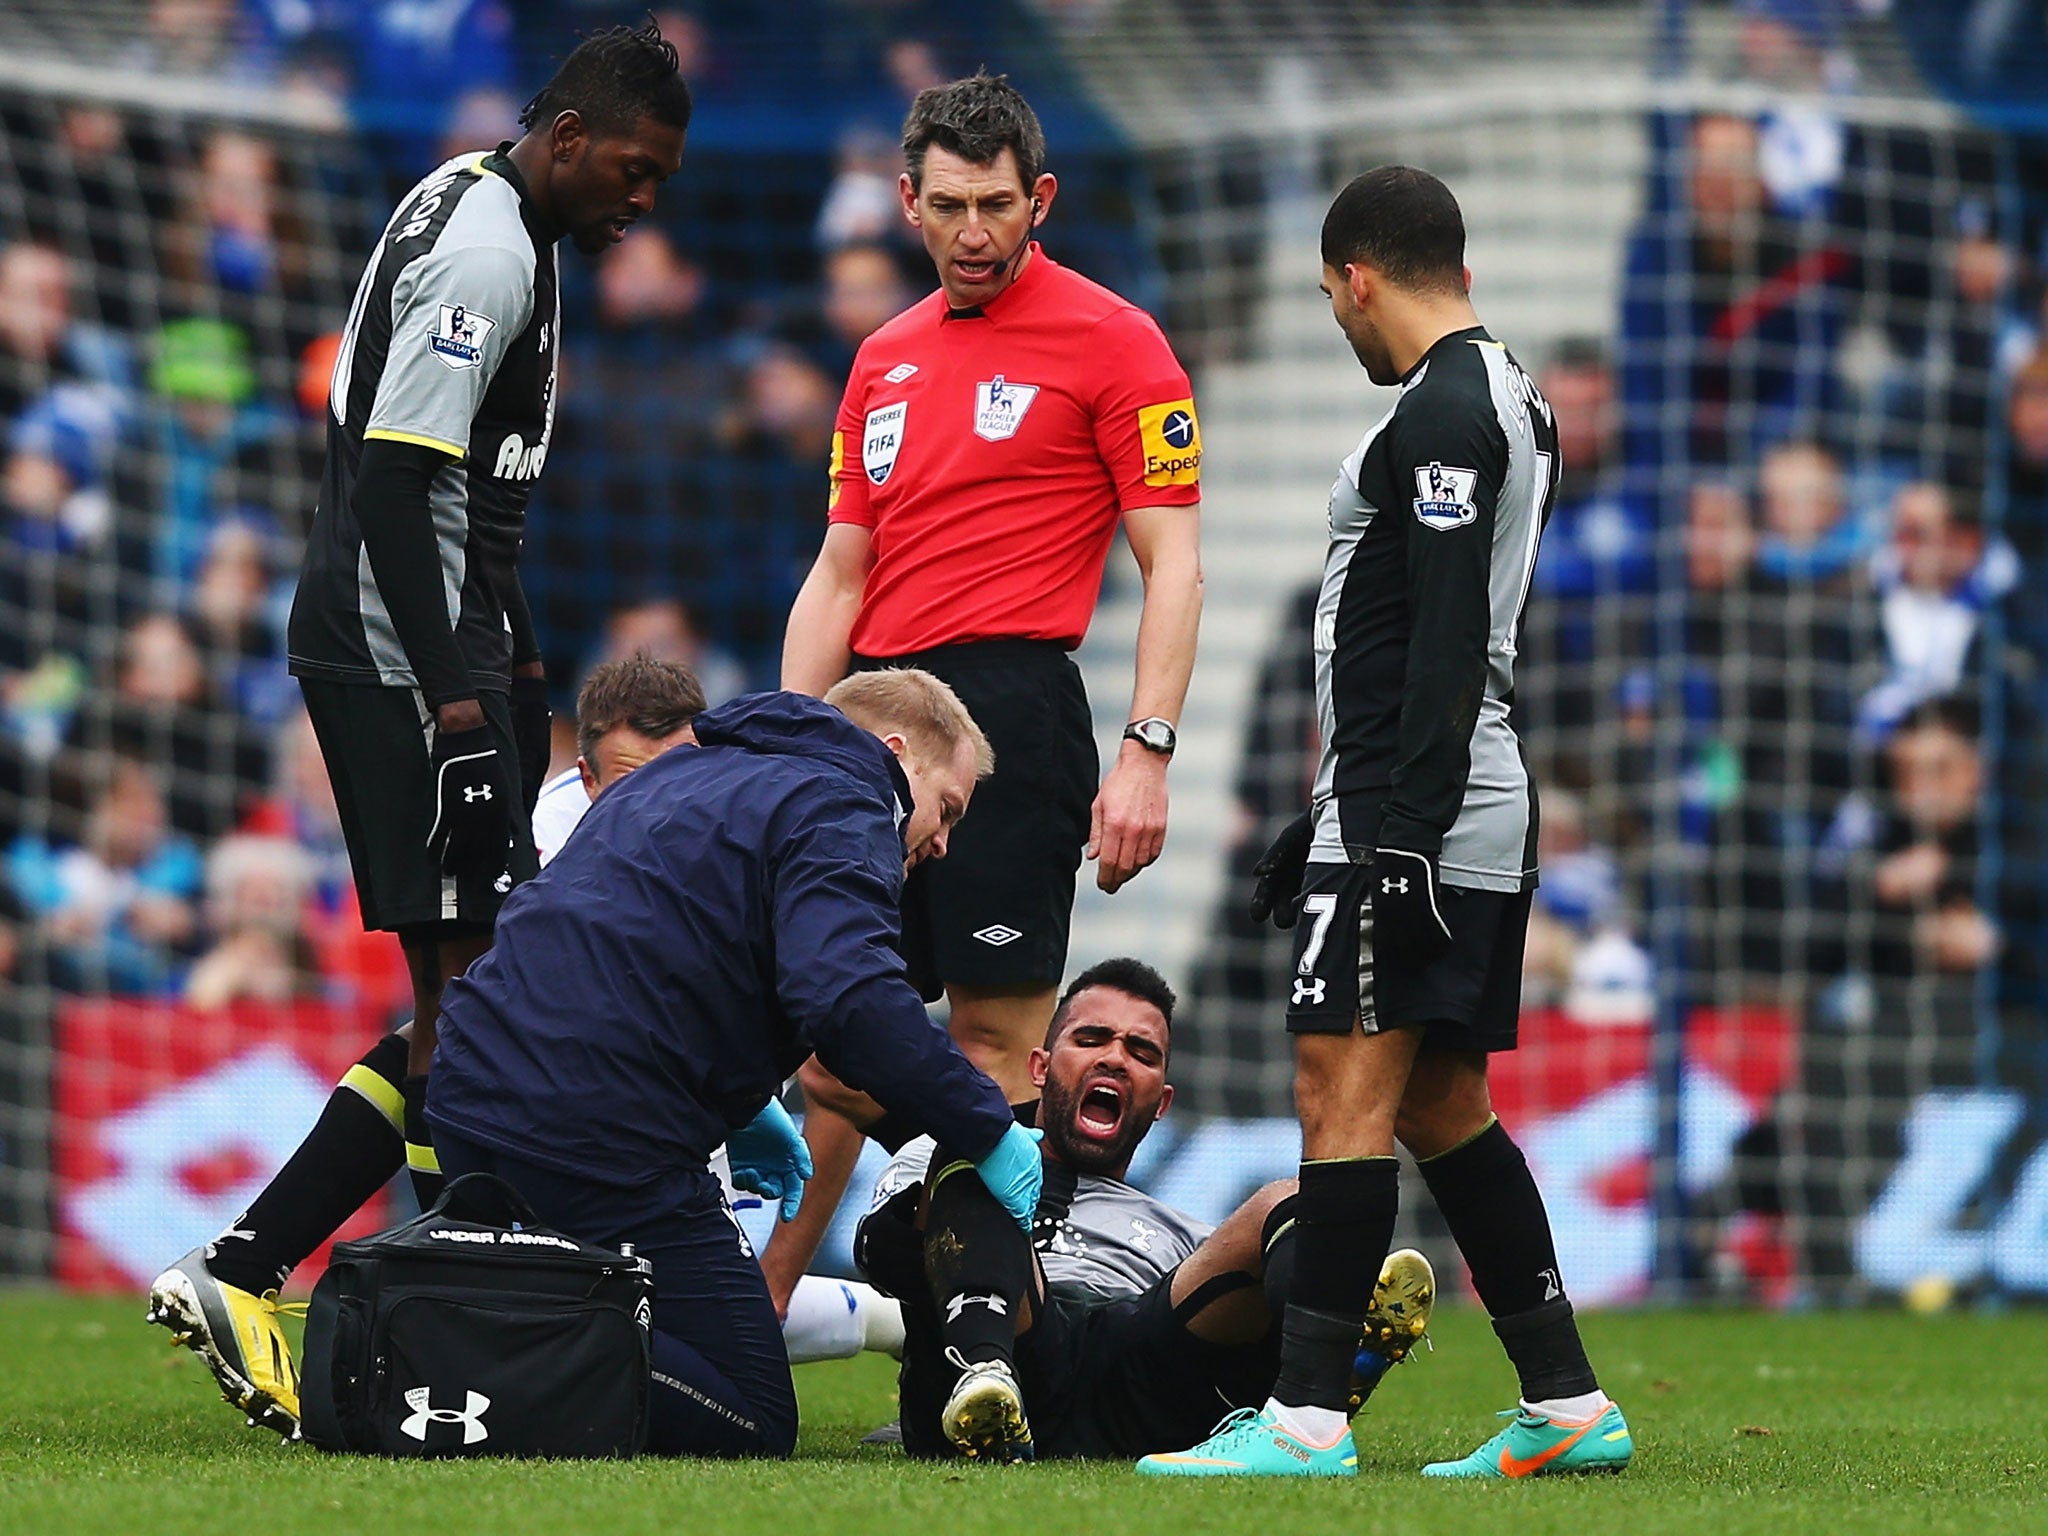 Sandro suffered a serious knee injury in January